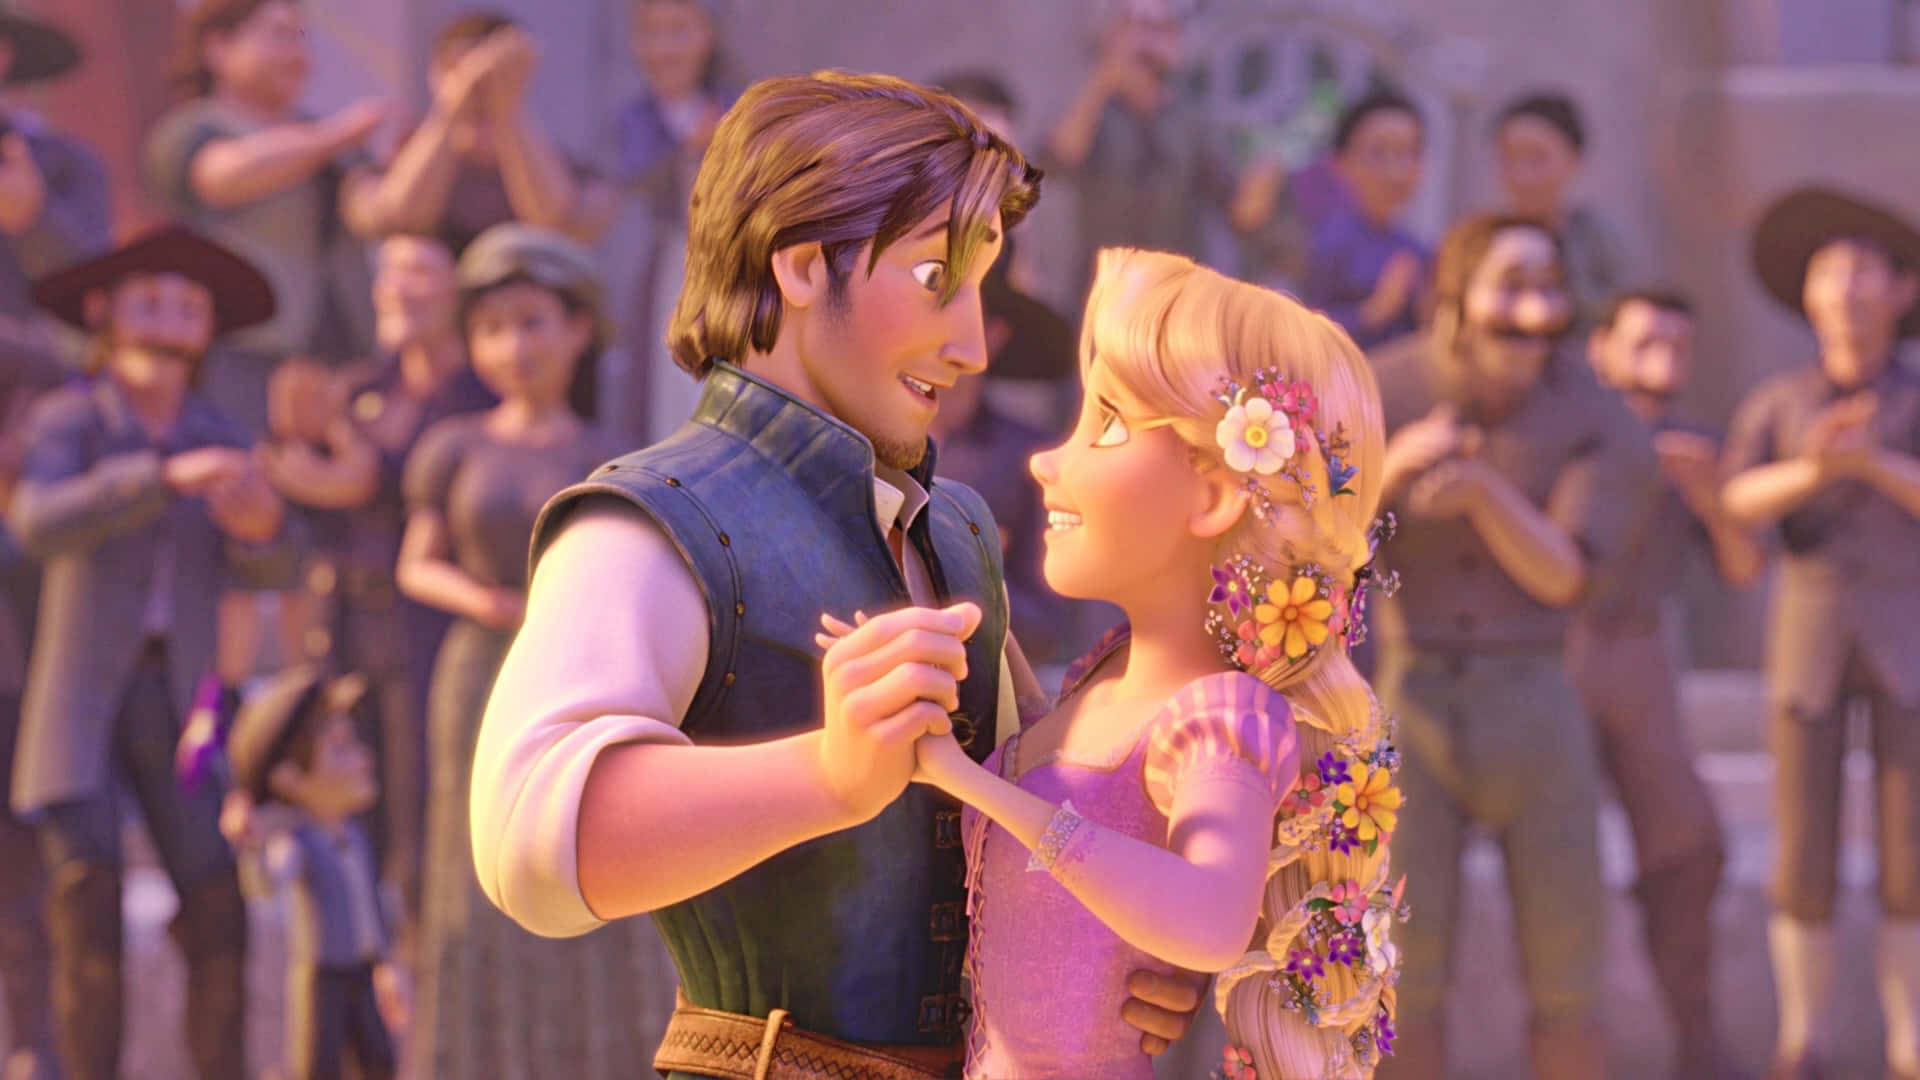 Rapunzel embracing her freedom in the new movie Tangled